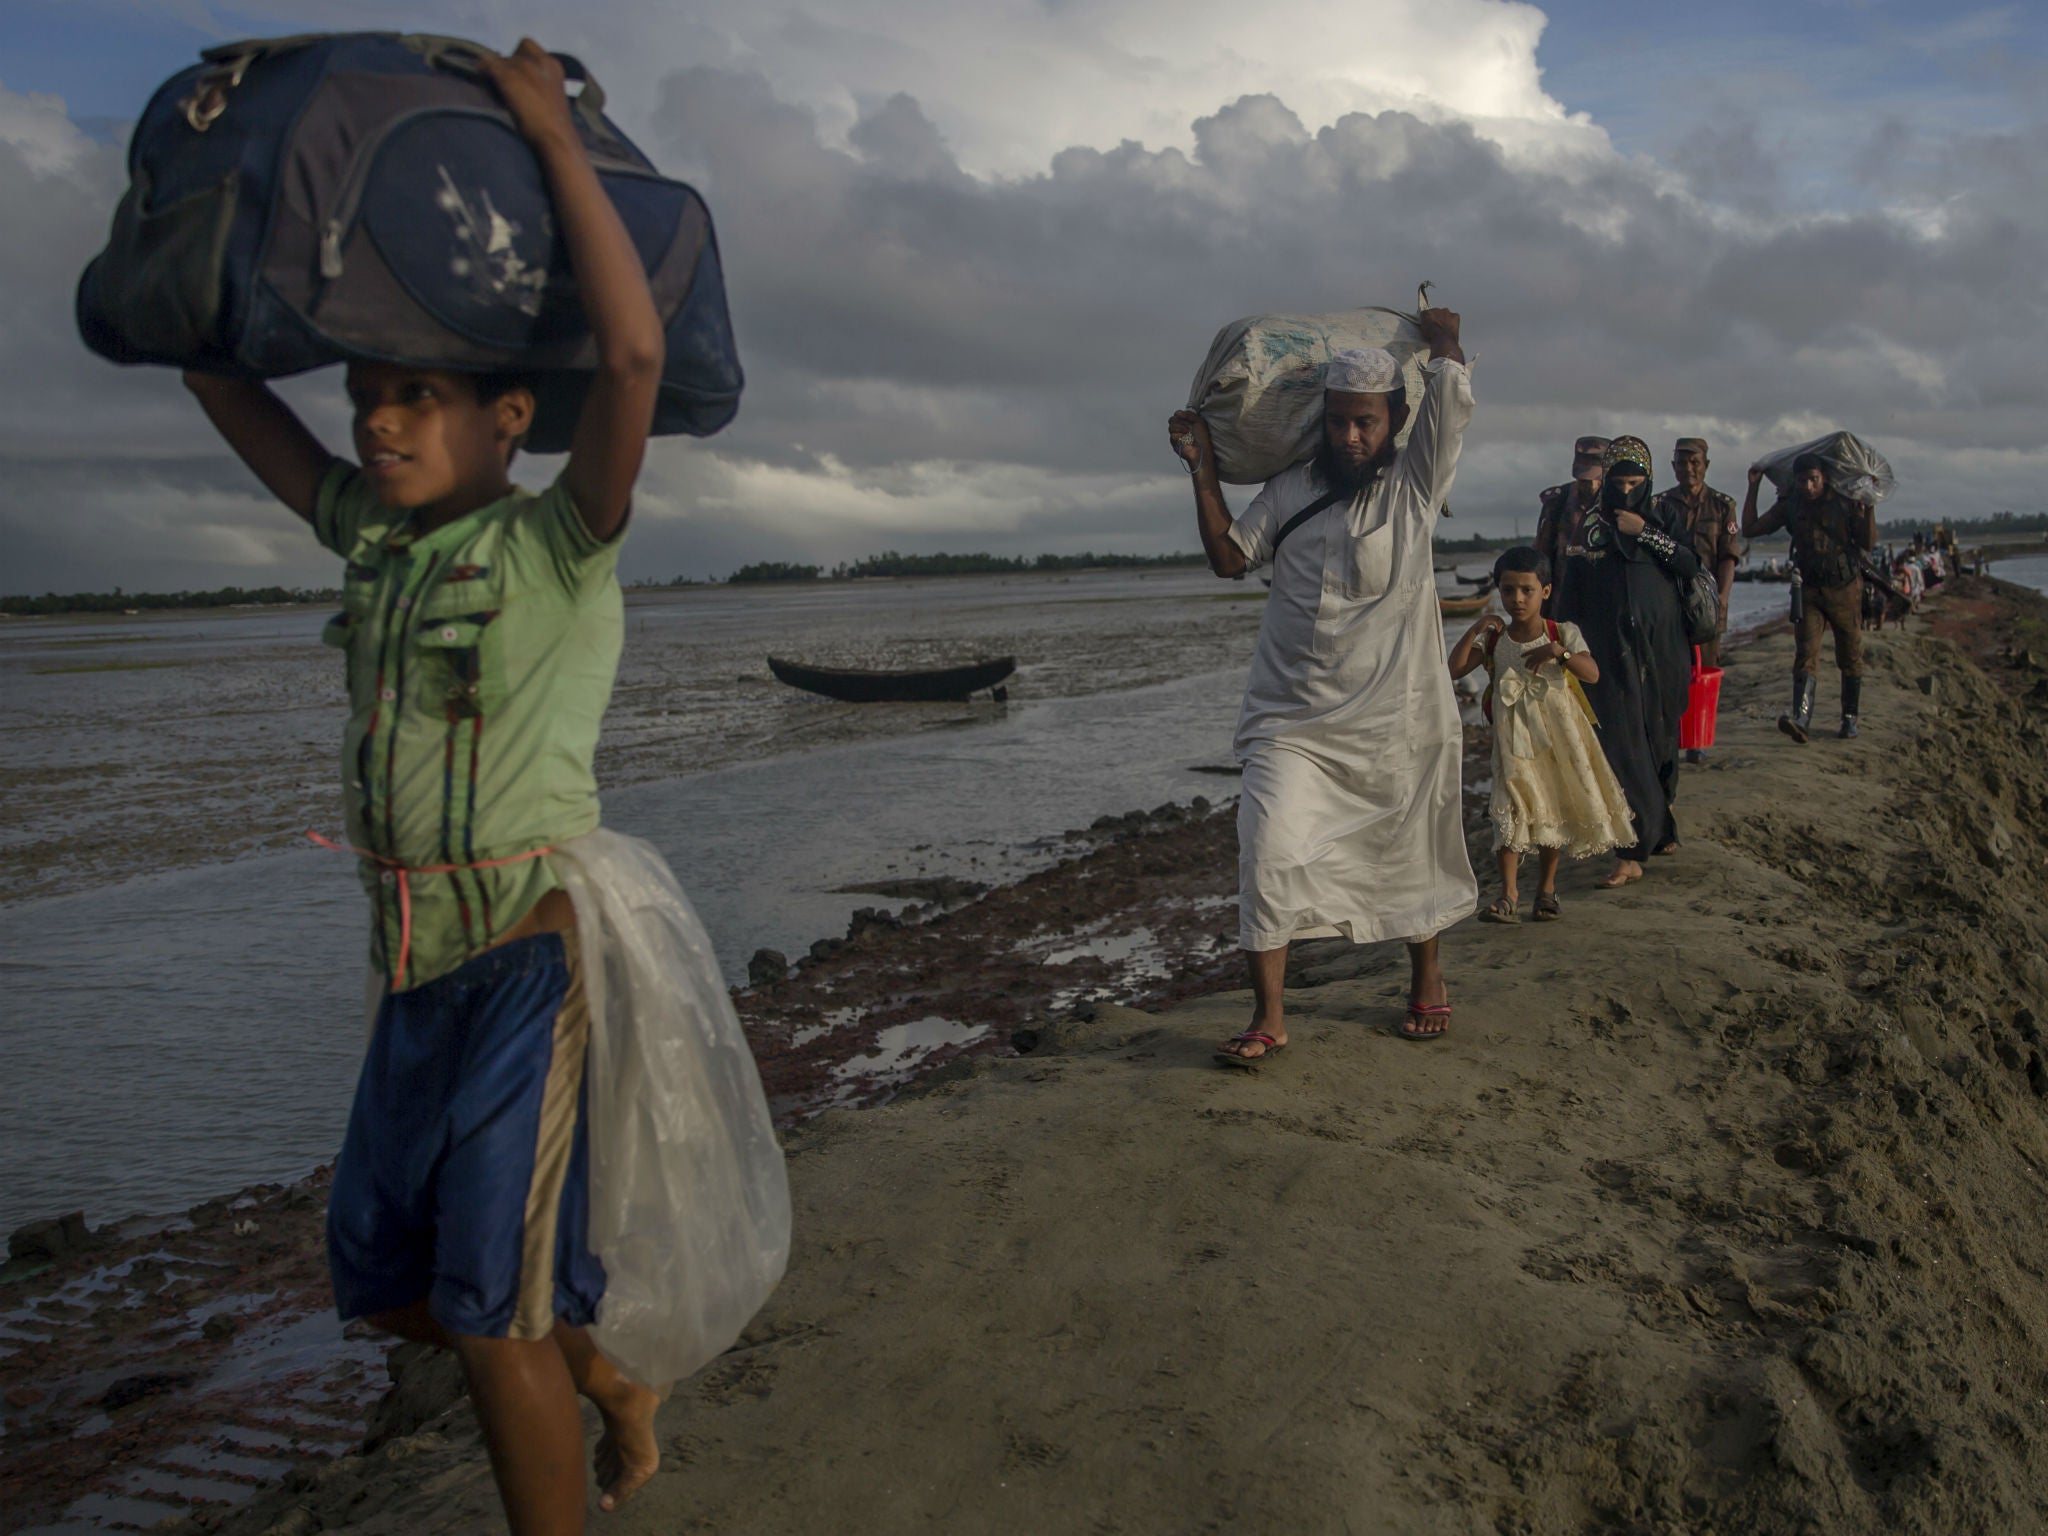 More than 650,000 Rohingya are estimated to have fled from Myanmar into Bangladesh